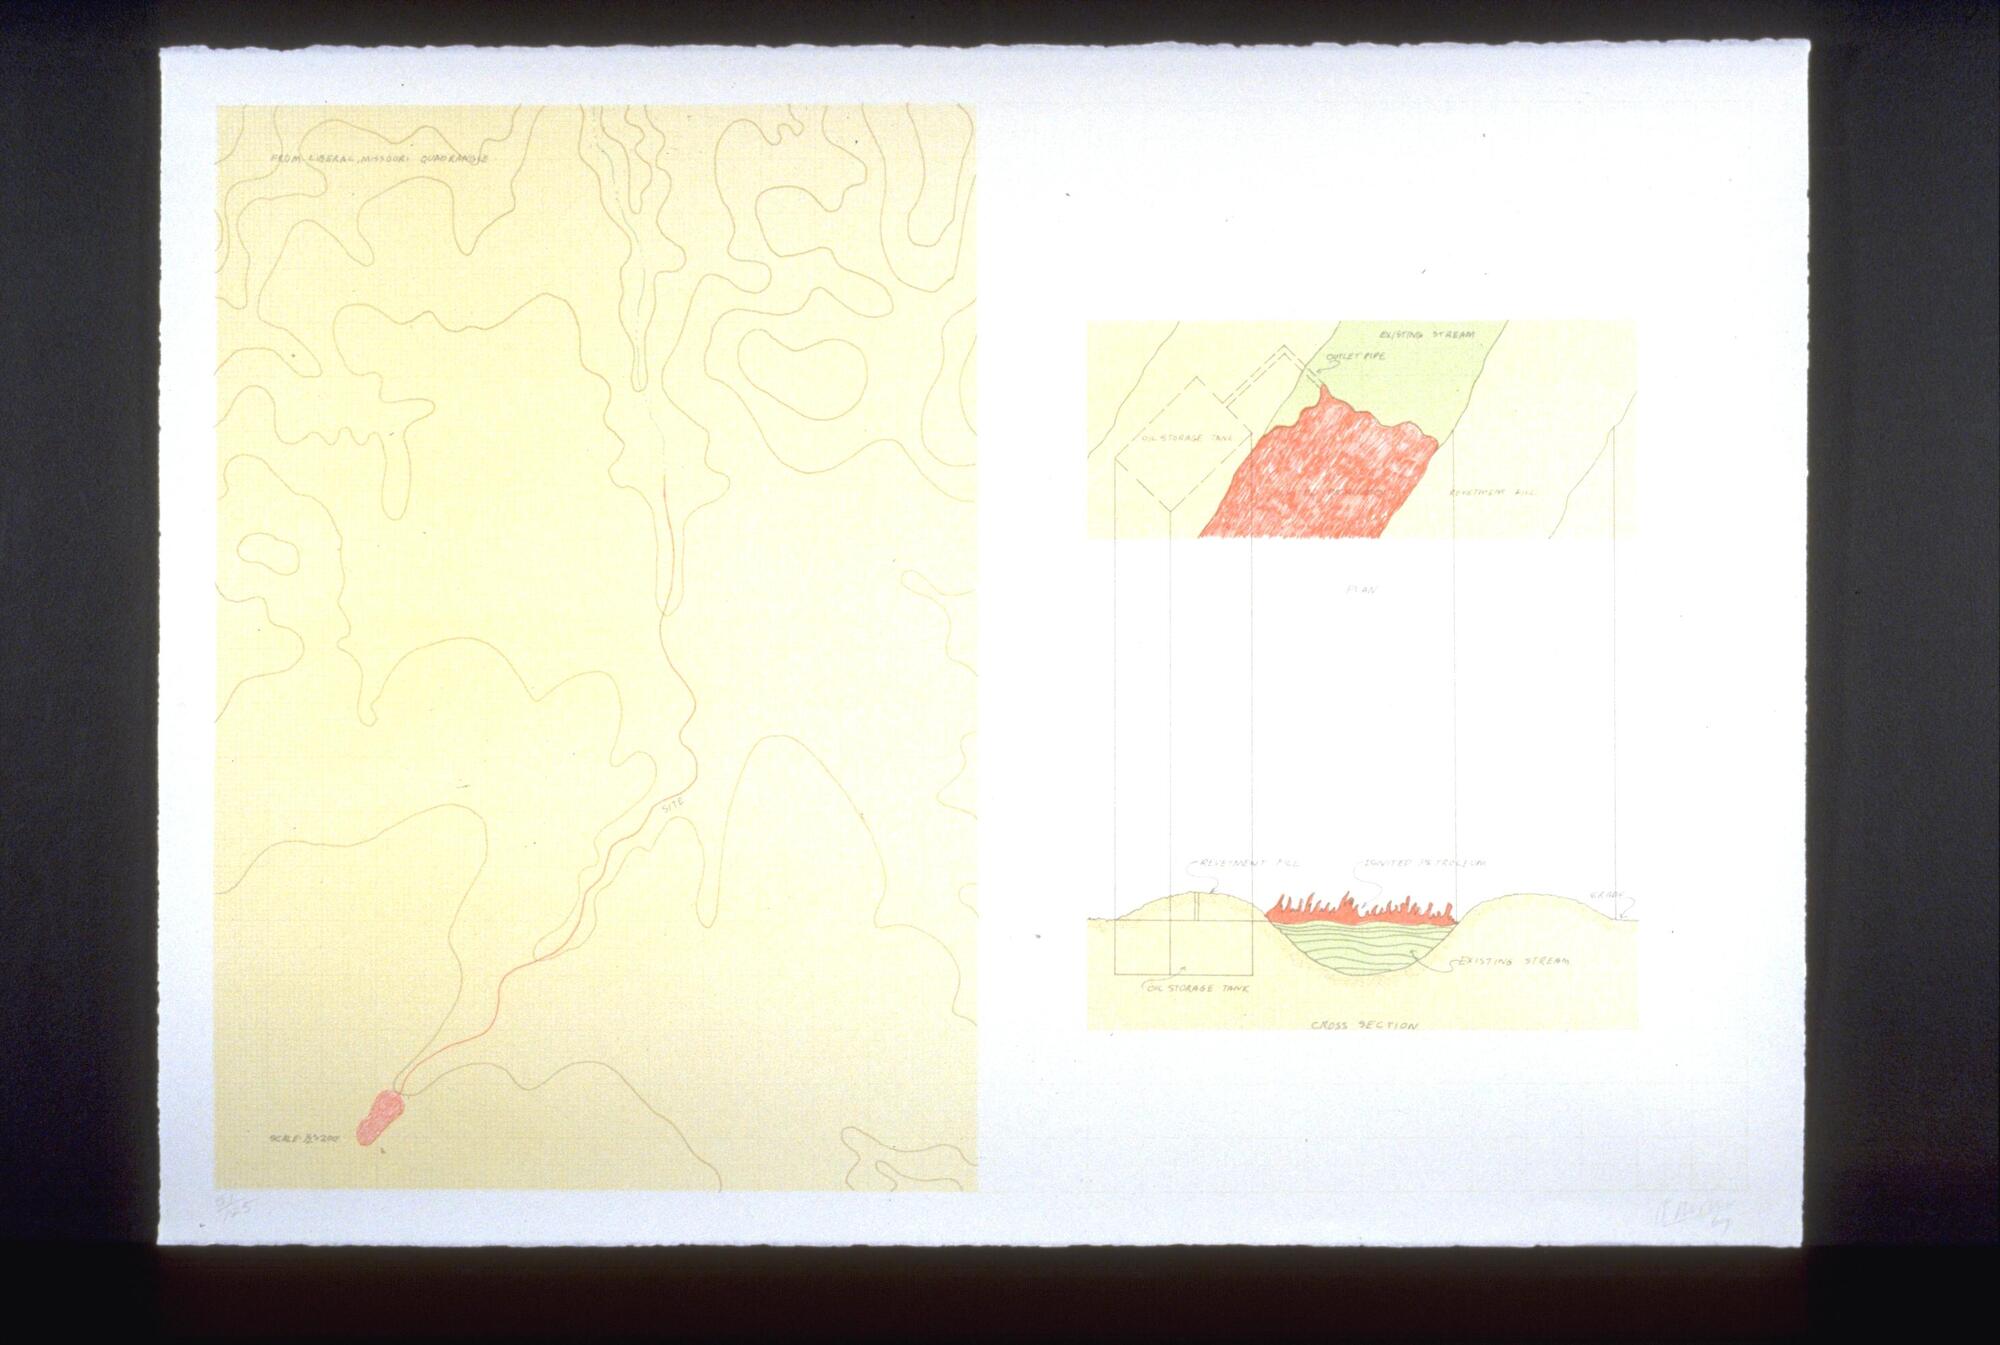 This lithograph on white wove paper is horizontally oriented with a grid of light gray lines on a white background. On the left side is a yellow contour map with a red line and a small red colored shape.  On the right there are two diagrams, one above the other, and connected by vertical lines. On the bottom is a cross section plan with two yellow colored hills and a concave section between them. This section is filled with jagged red form on top of a green form with wavy lines. The plan above that is a bird’s eye view with red and green sections corresponding to the diagram below. There are word labels for these diagrams.<br />